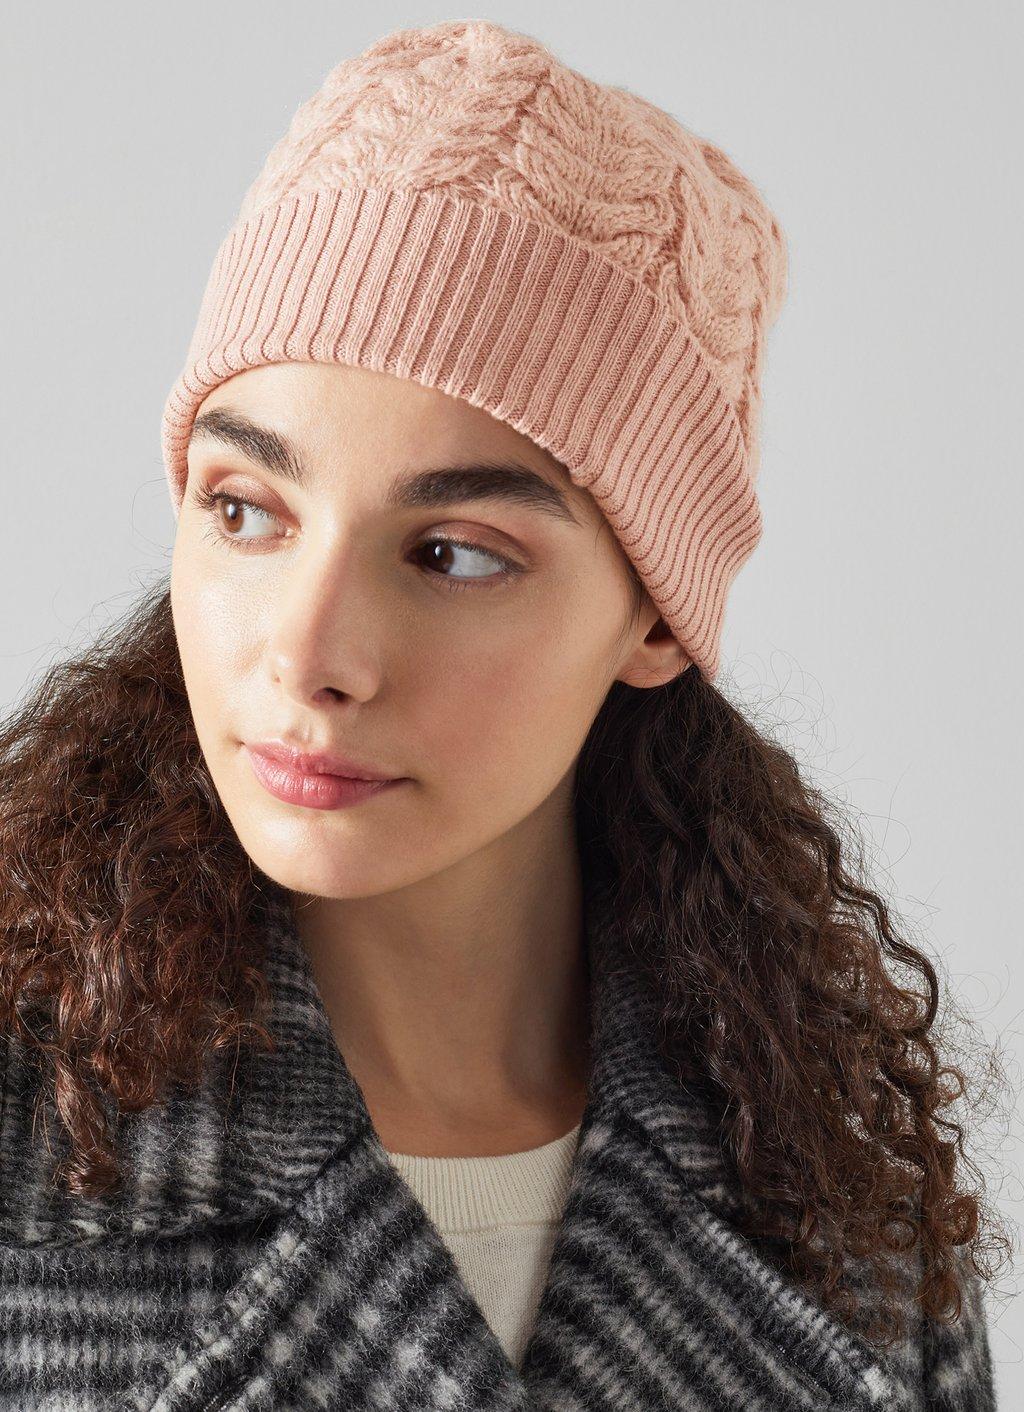 Old Town Pink Beanie